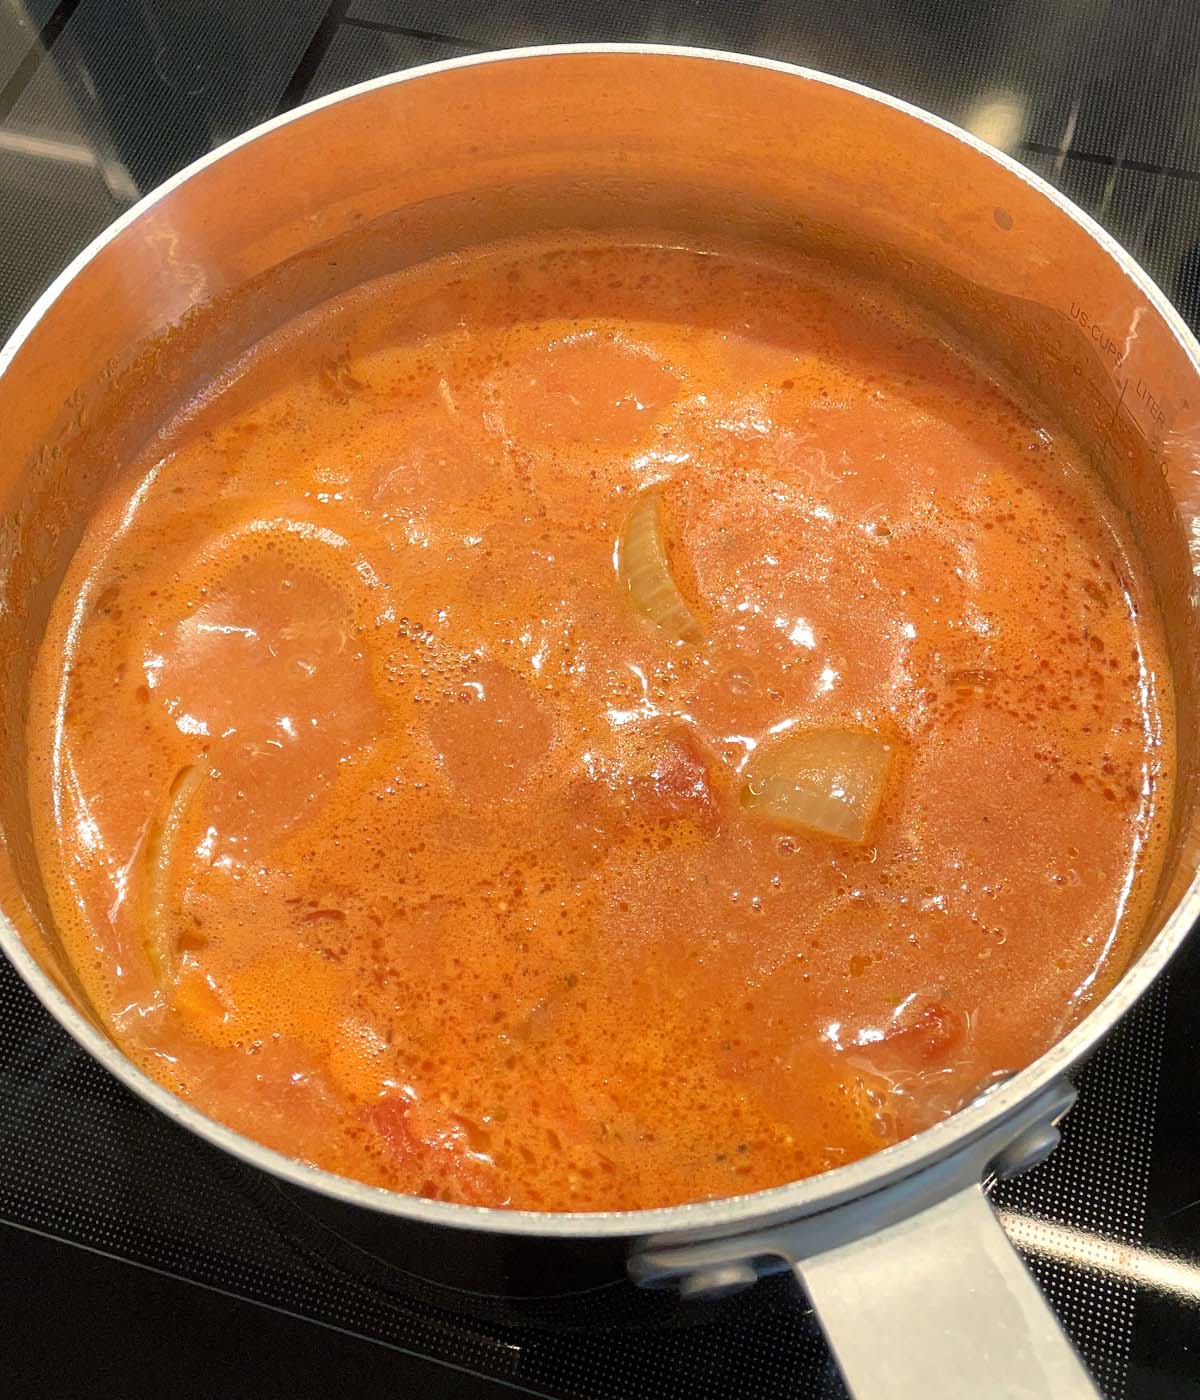 A metal pot containing boiling orange roasted tomato soup.